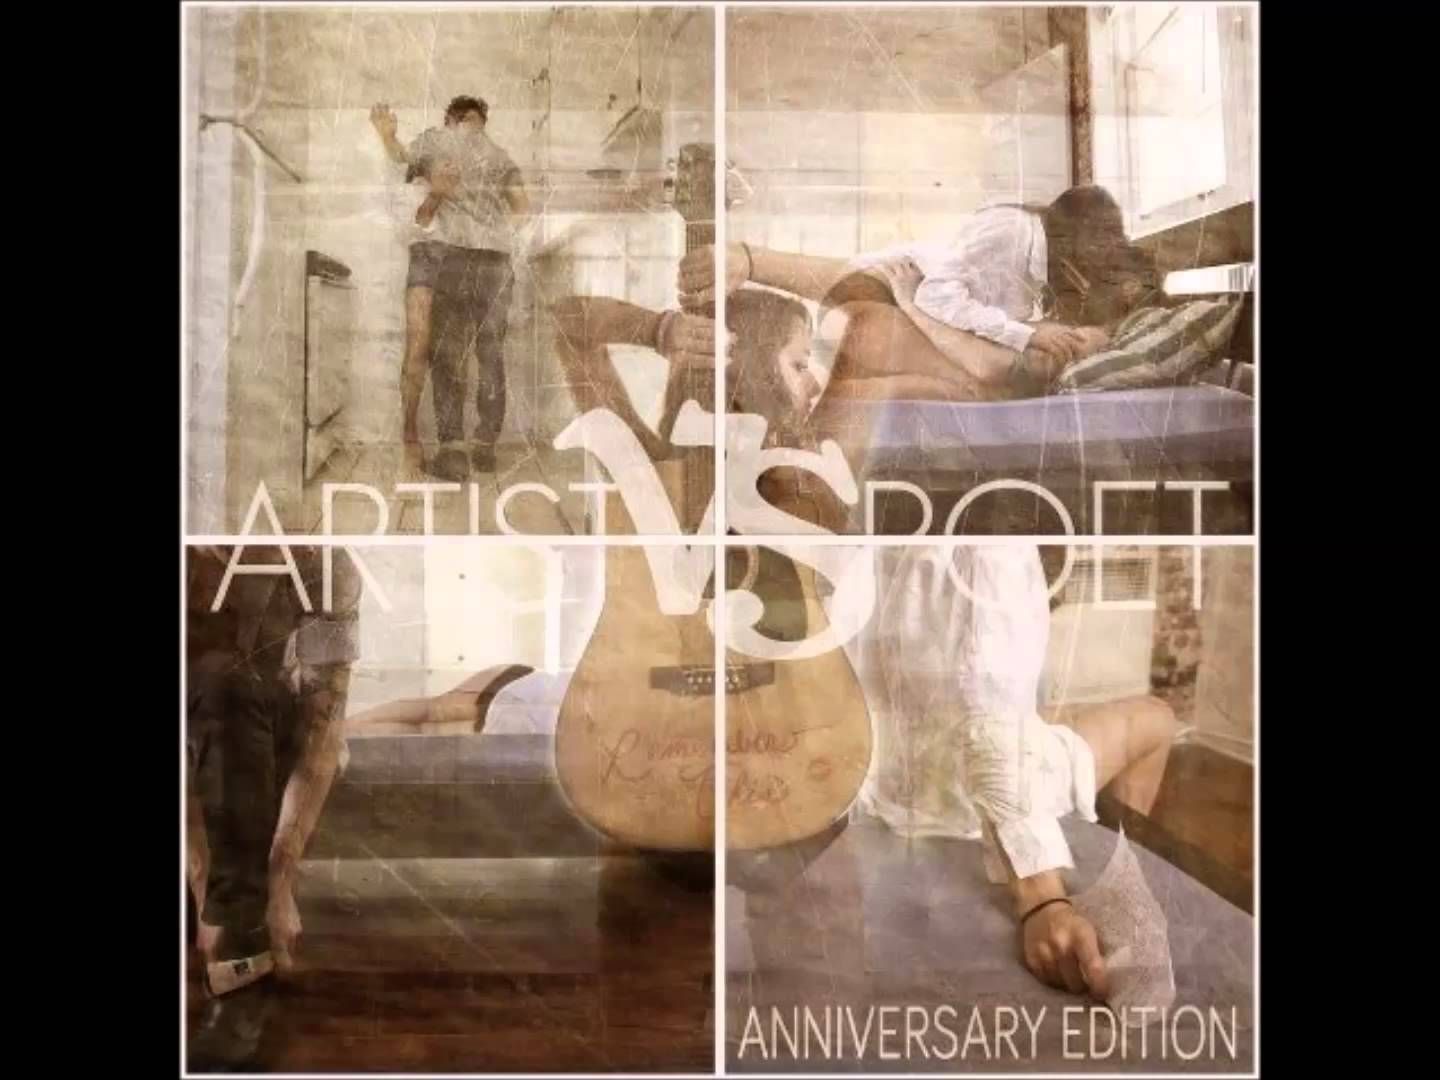 artist vs poet remember this anniversary edition m4a